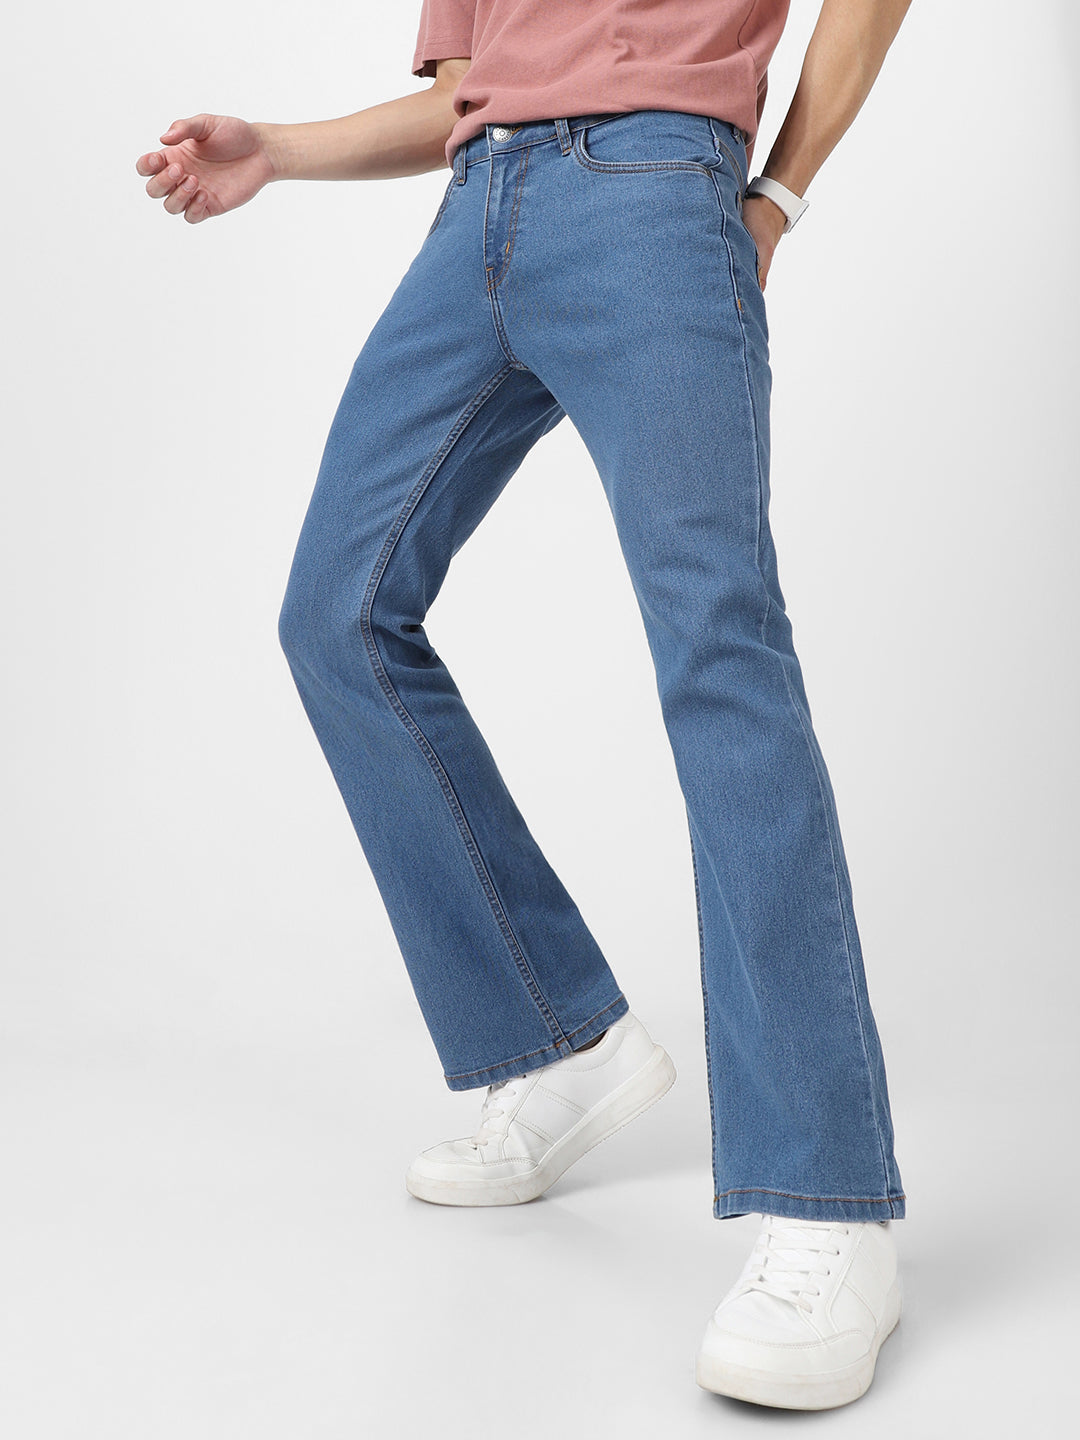 Men's Light Blue Washed Bootcut Jeans Stretchable